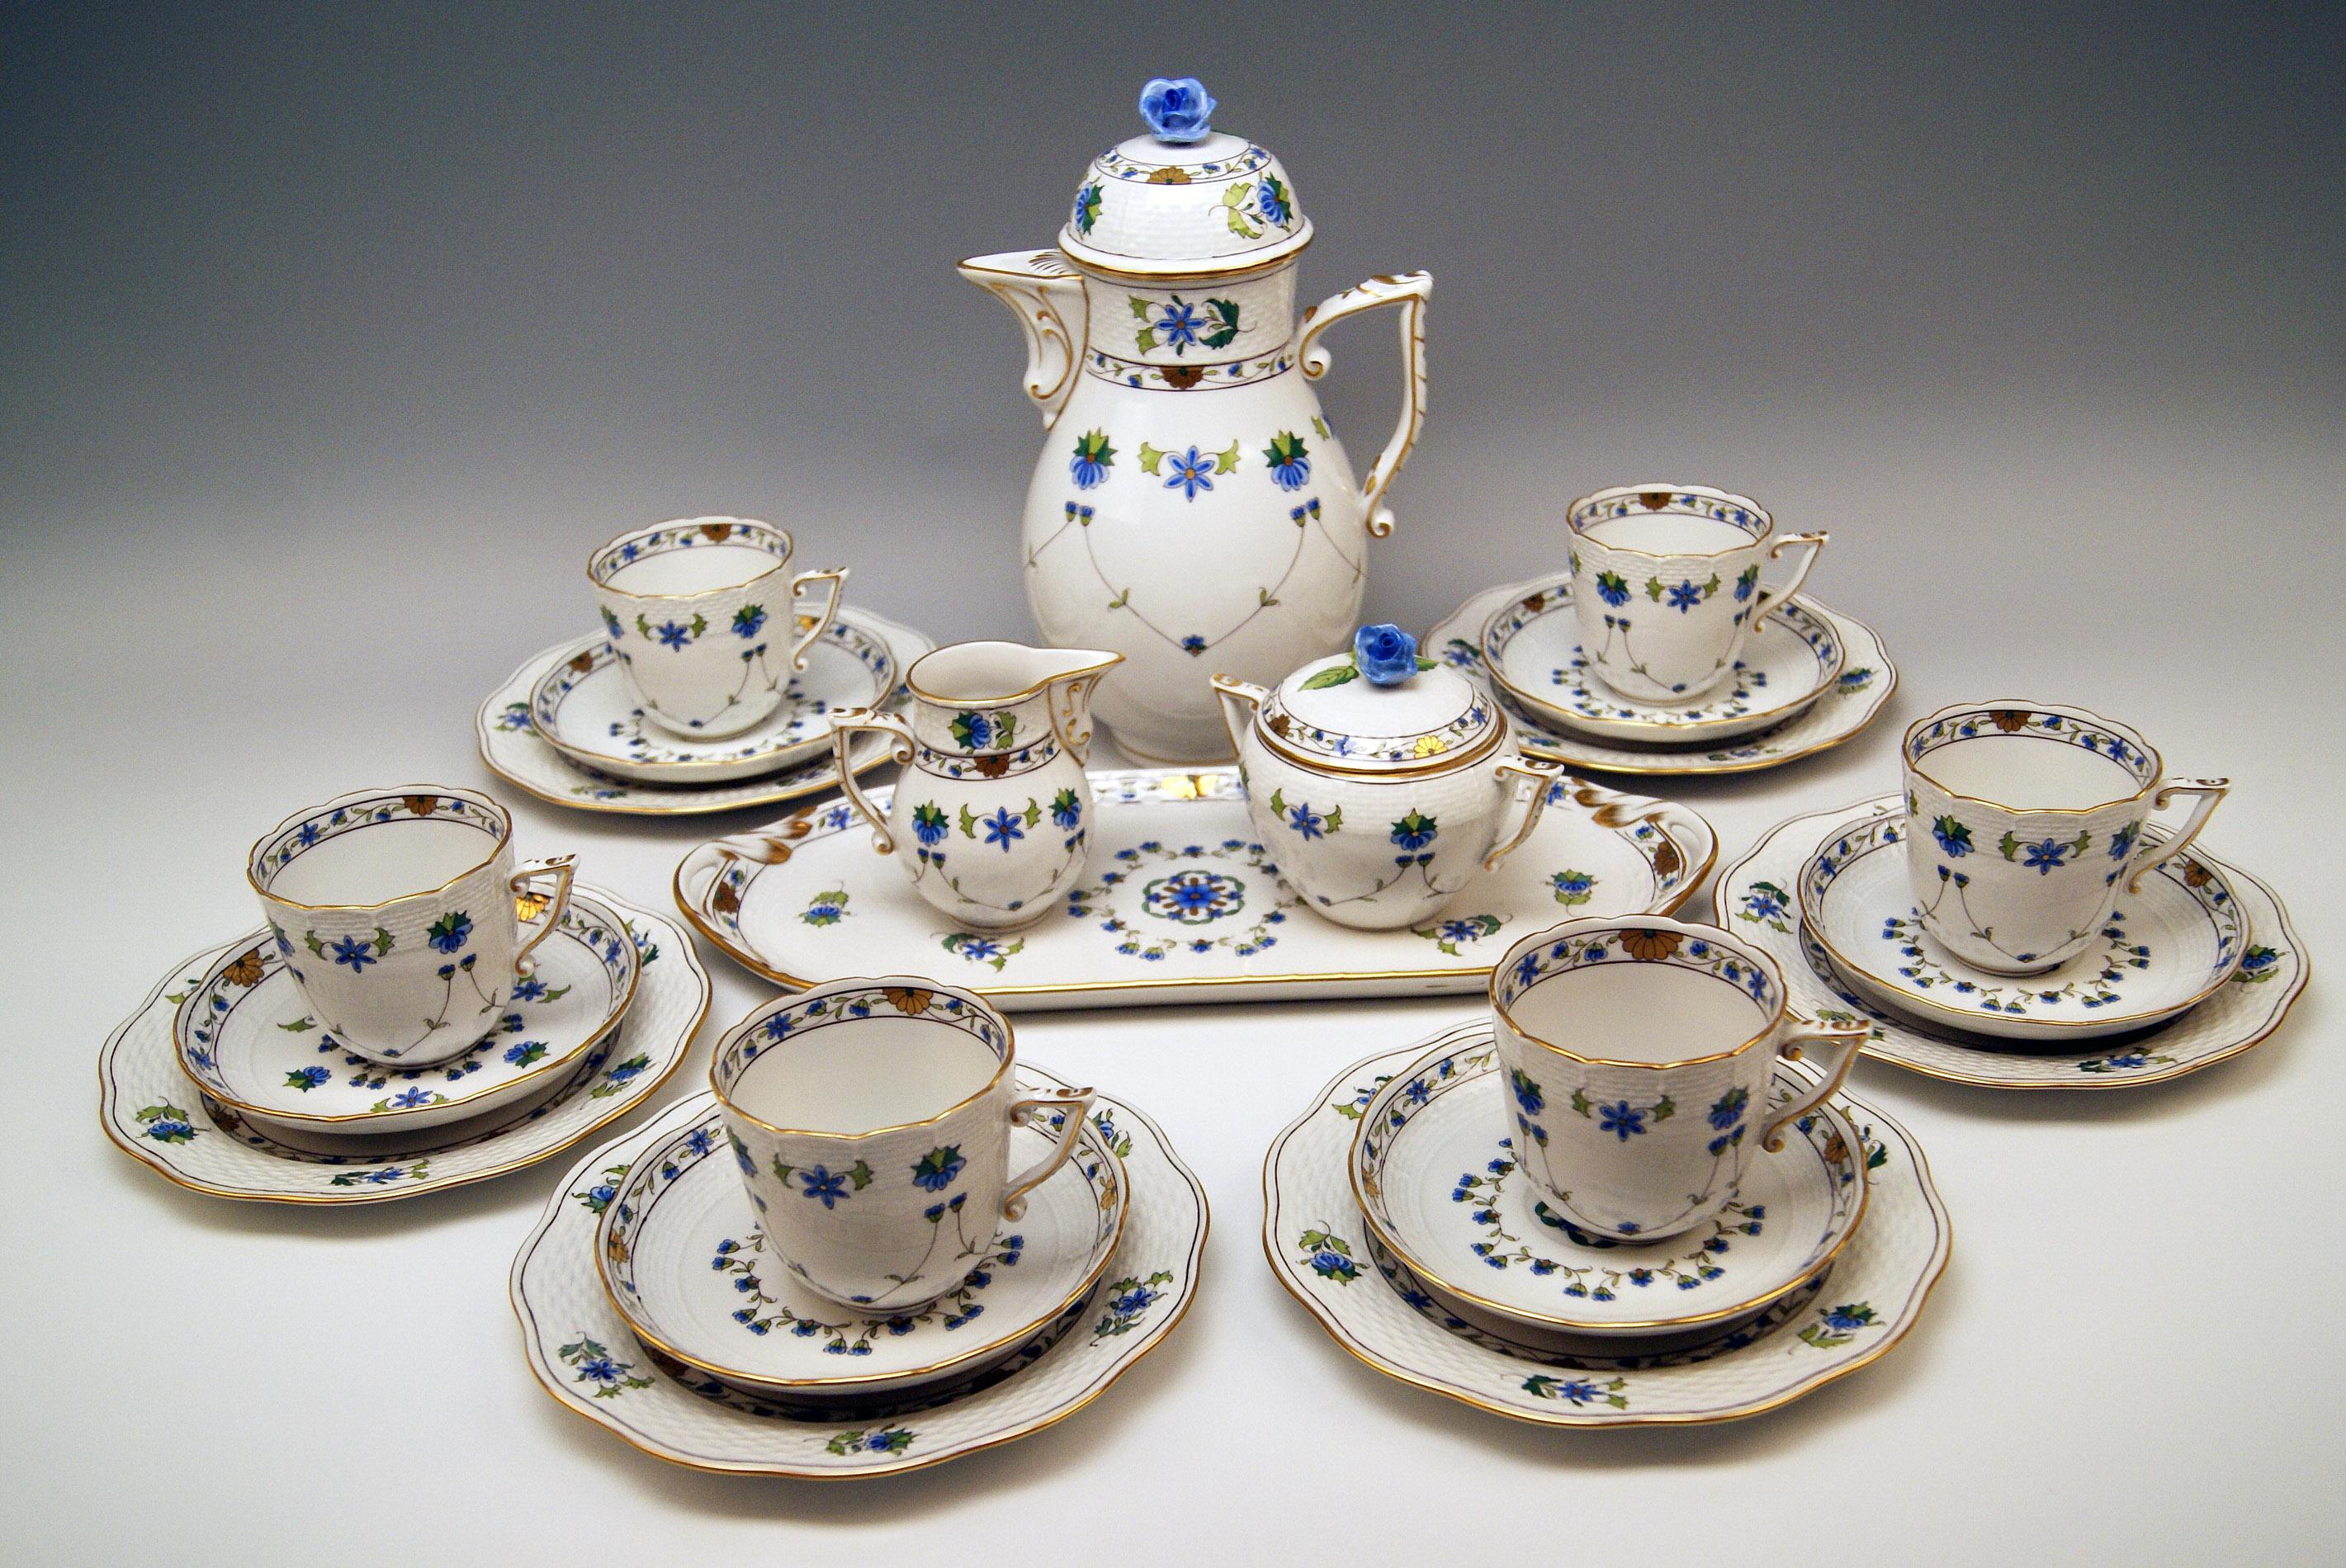 Herend Coffee Set for Six Persons 
Decor Lahore / LHTBW, partially golden painted 
form type Osier
made circa 1950-1960

This Herend coffee set consists of following parts:
-- six coffee cup with saucers
-- six dessert plates
-- lidded